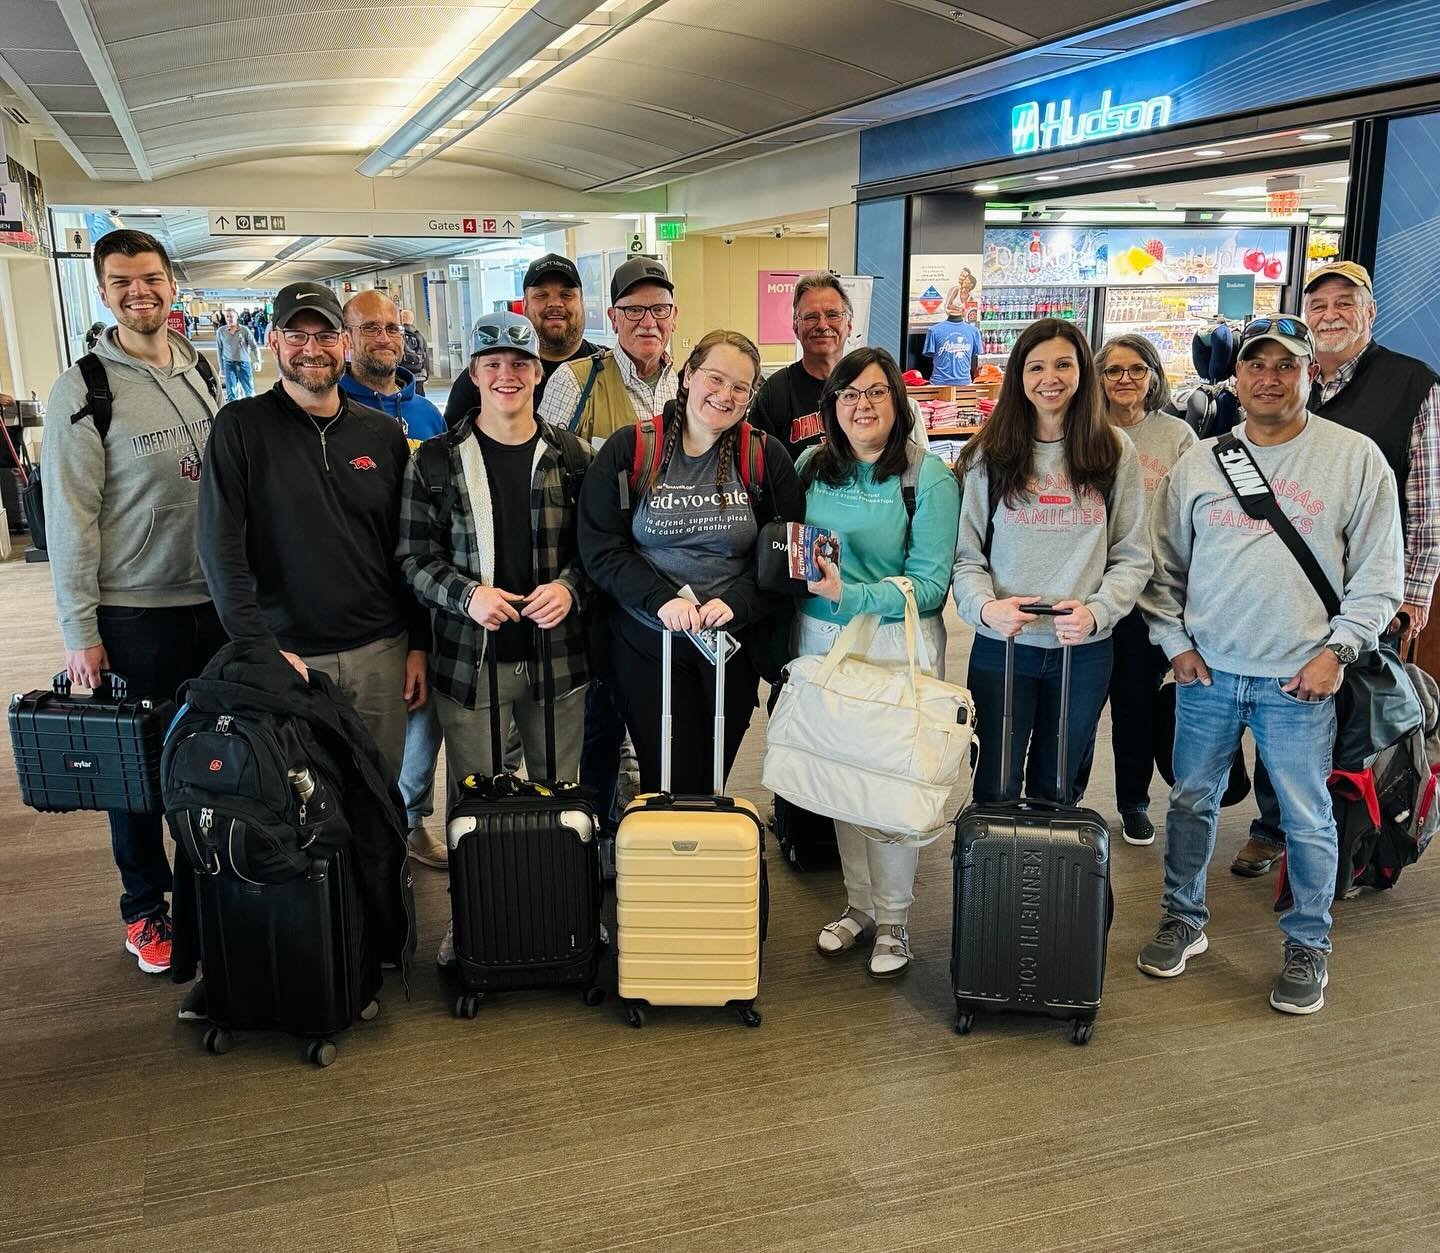 Our ABCFM Alaska Mission Team safely arrived in Anchorage on Friday night. They spent the weekend getting settled in and preparing for the week, sightseeing, and enjoyed an incredible worship service this morning. A very special thank you to True Nor